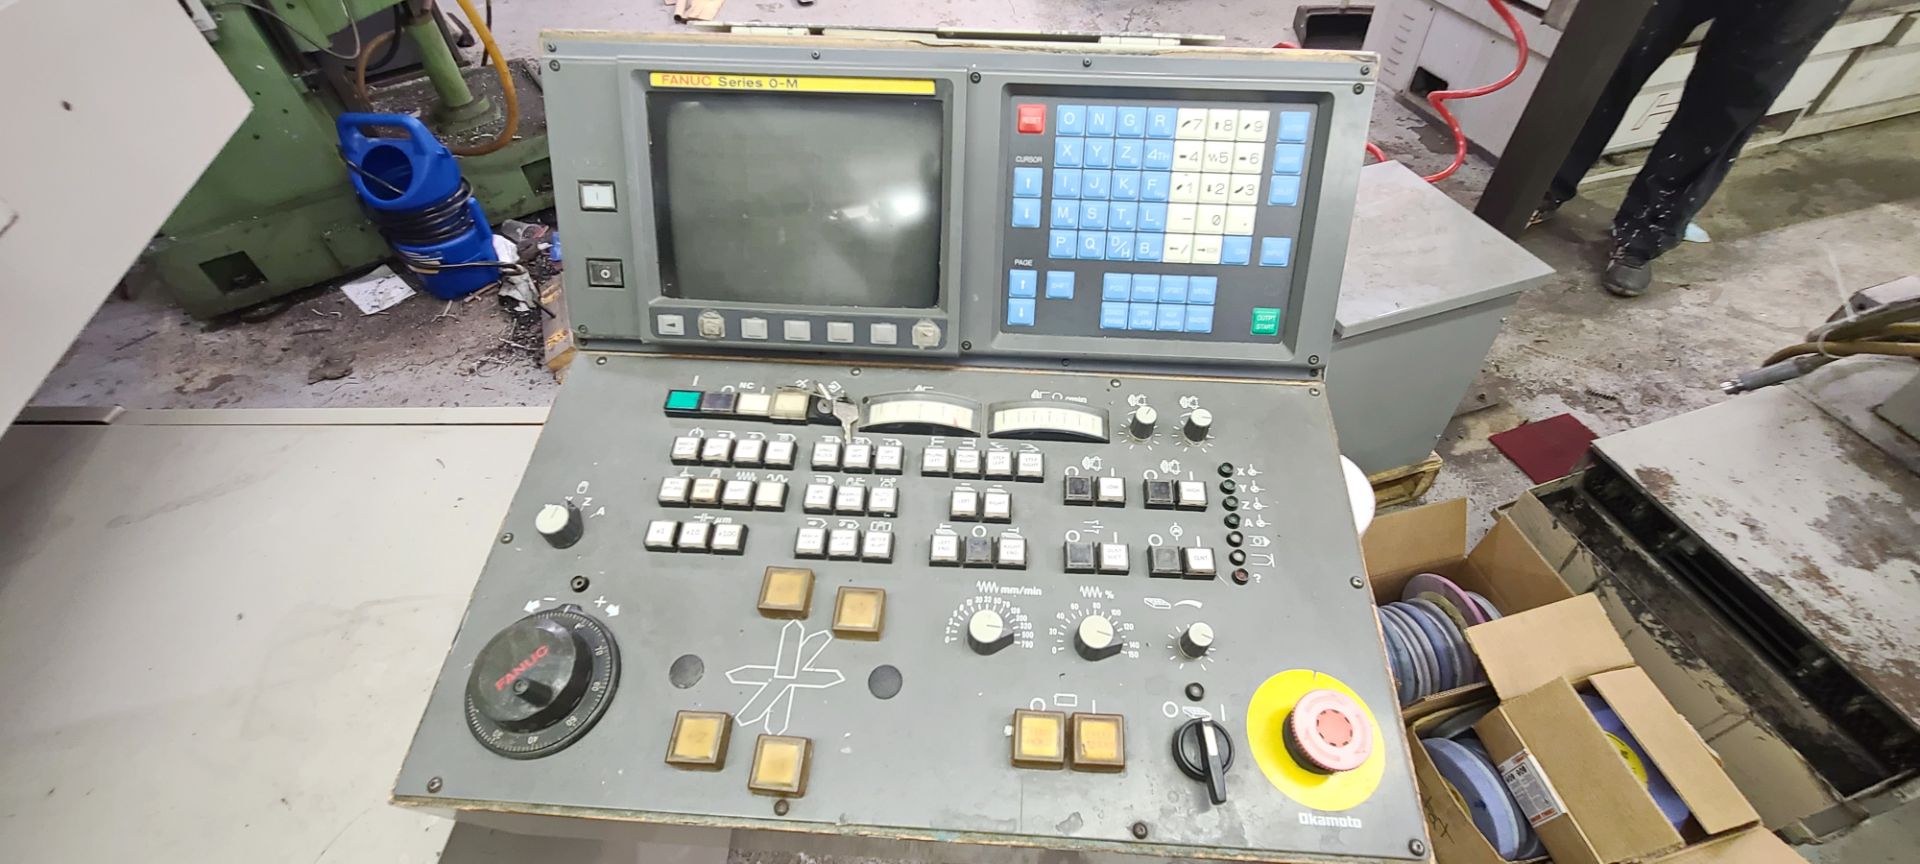 2004 Okamoto ACC-63-DXNCP CNC Surface Grinding Machine, Fanuc O-M Controller, Coolant System, - Image 13 of 23